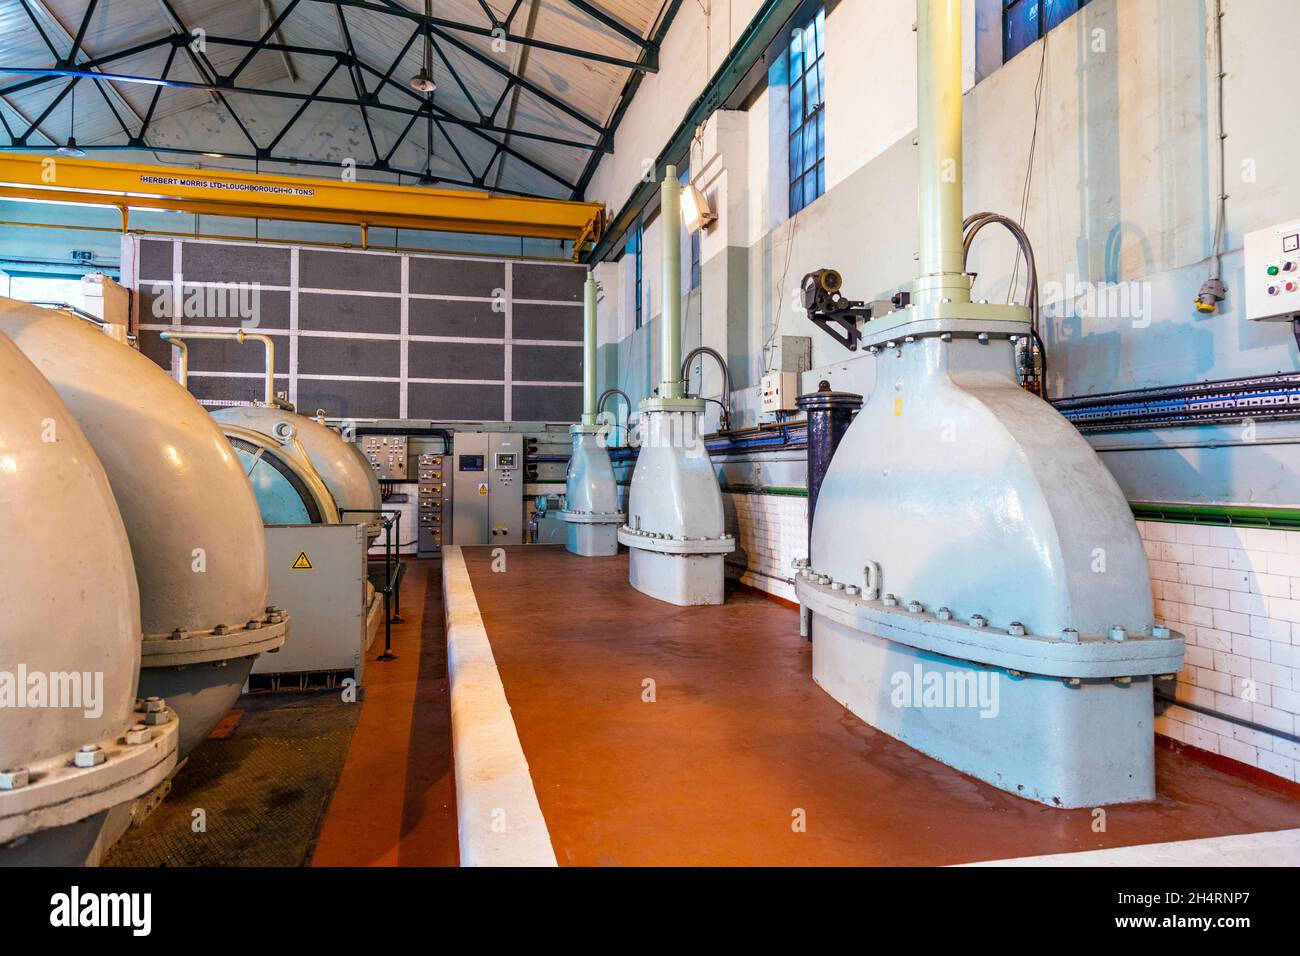 Pumps used to pump water from the river Thames (left) and blades (right) used to control the water flow in and and out of the South Dock at West India Dock Impounding Station, Canary Wharf, London, UK Stock Photo